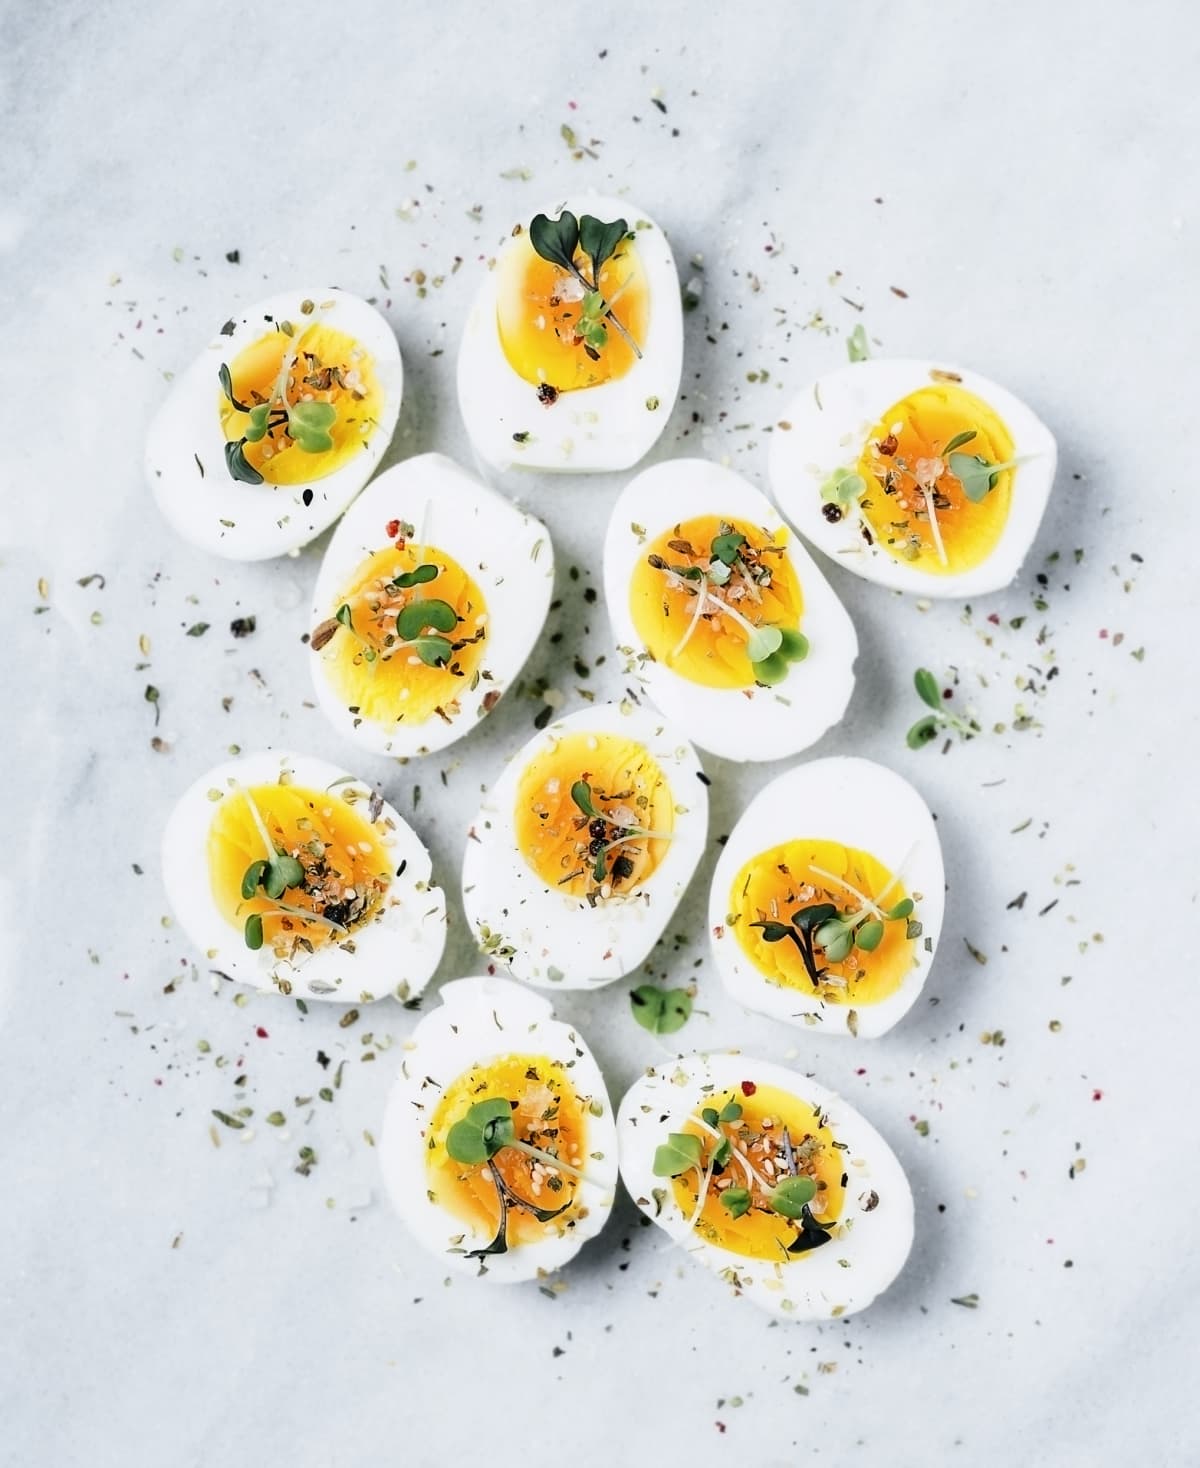 Hard boiled eggs with herbs and spices on white background